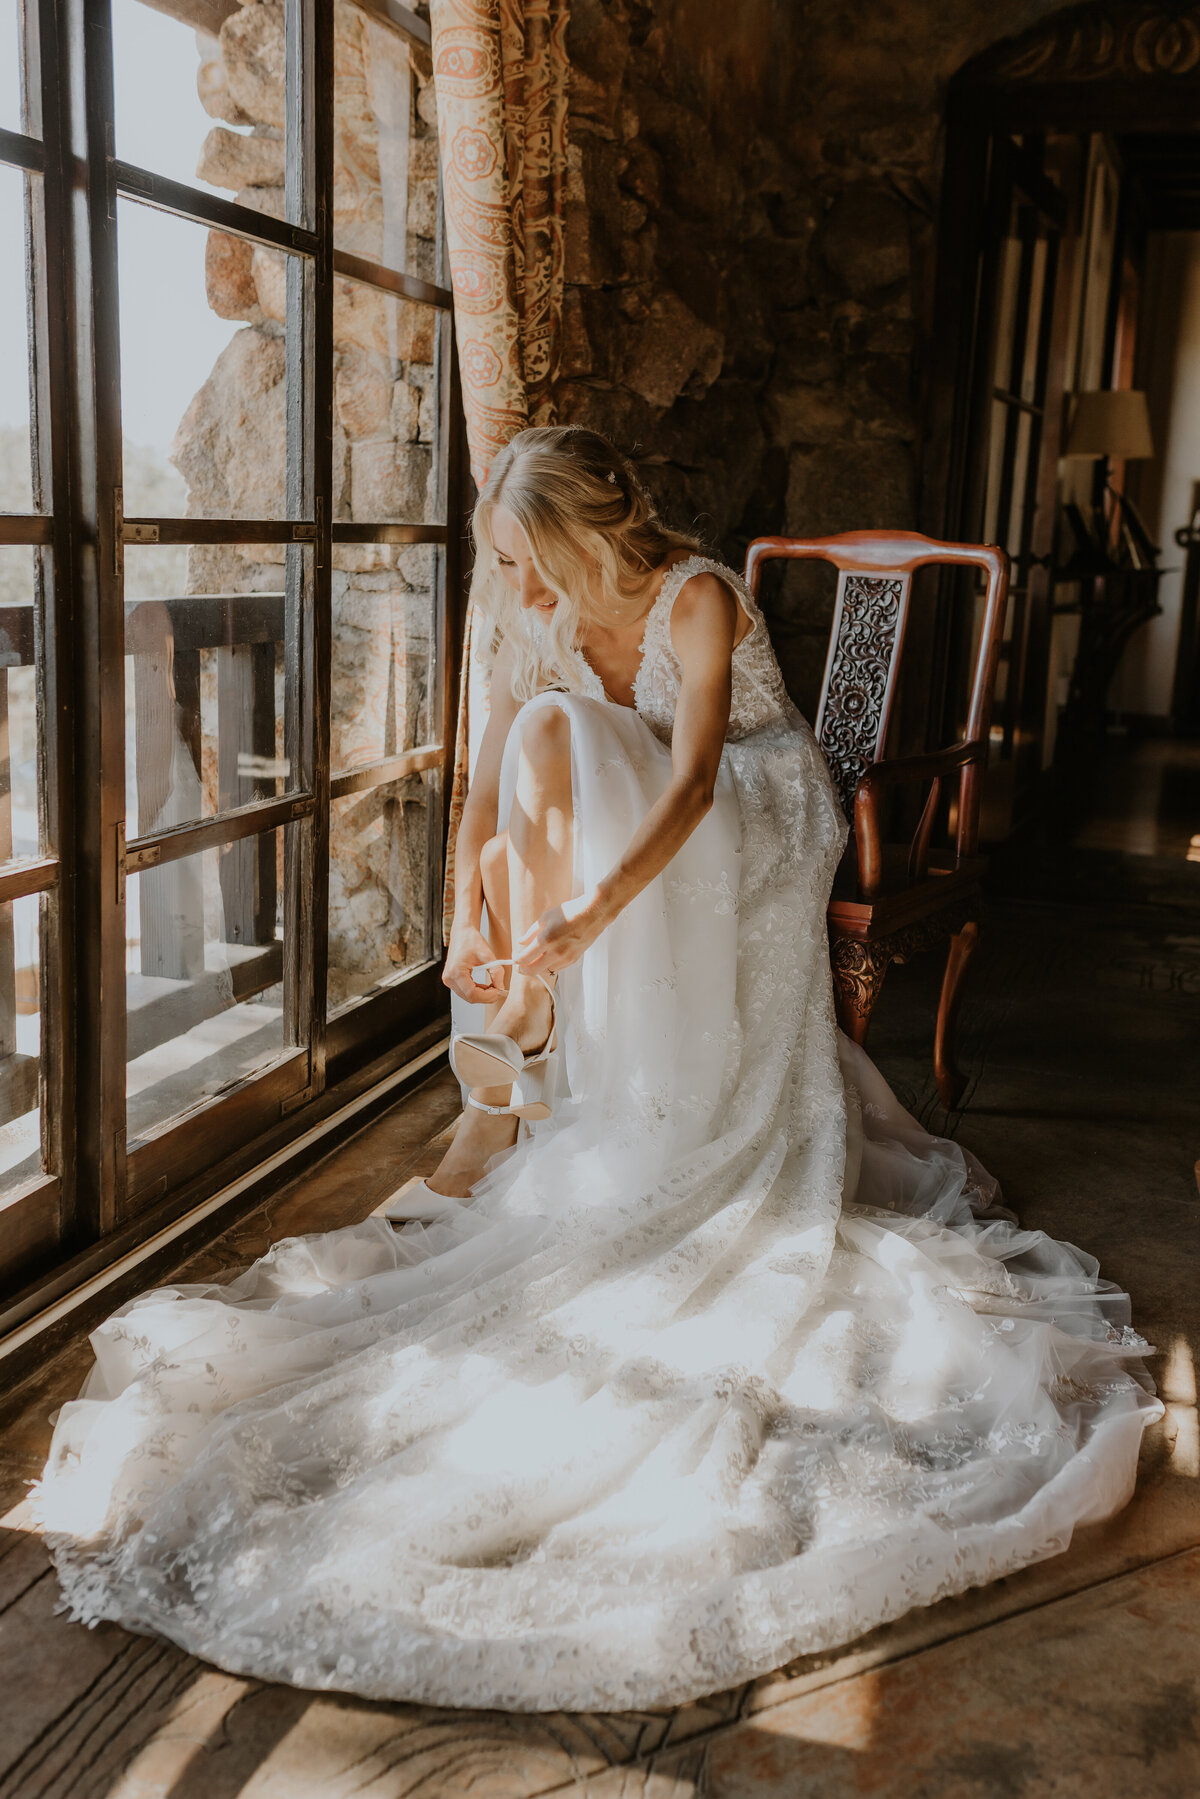 Temecula, California Wedding photographer Yescphotography Bride in front of window